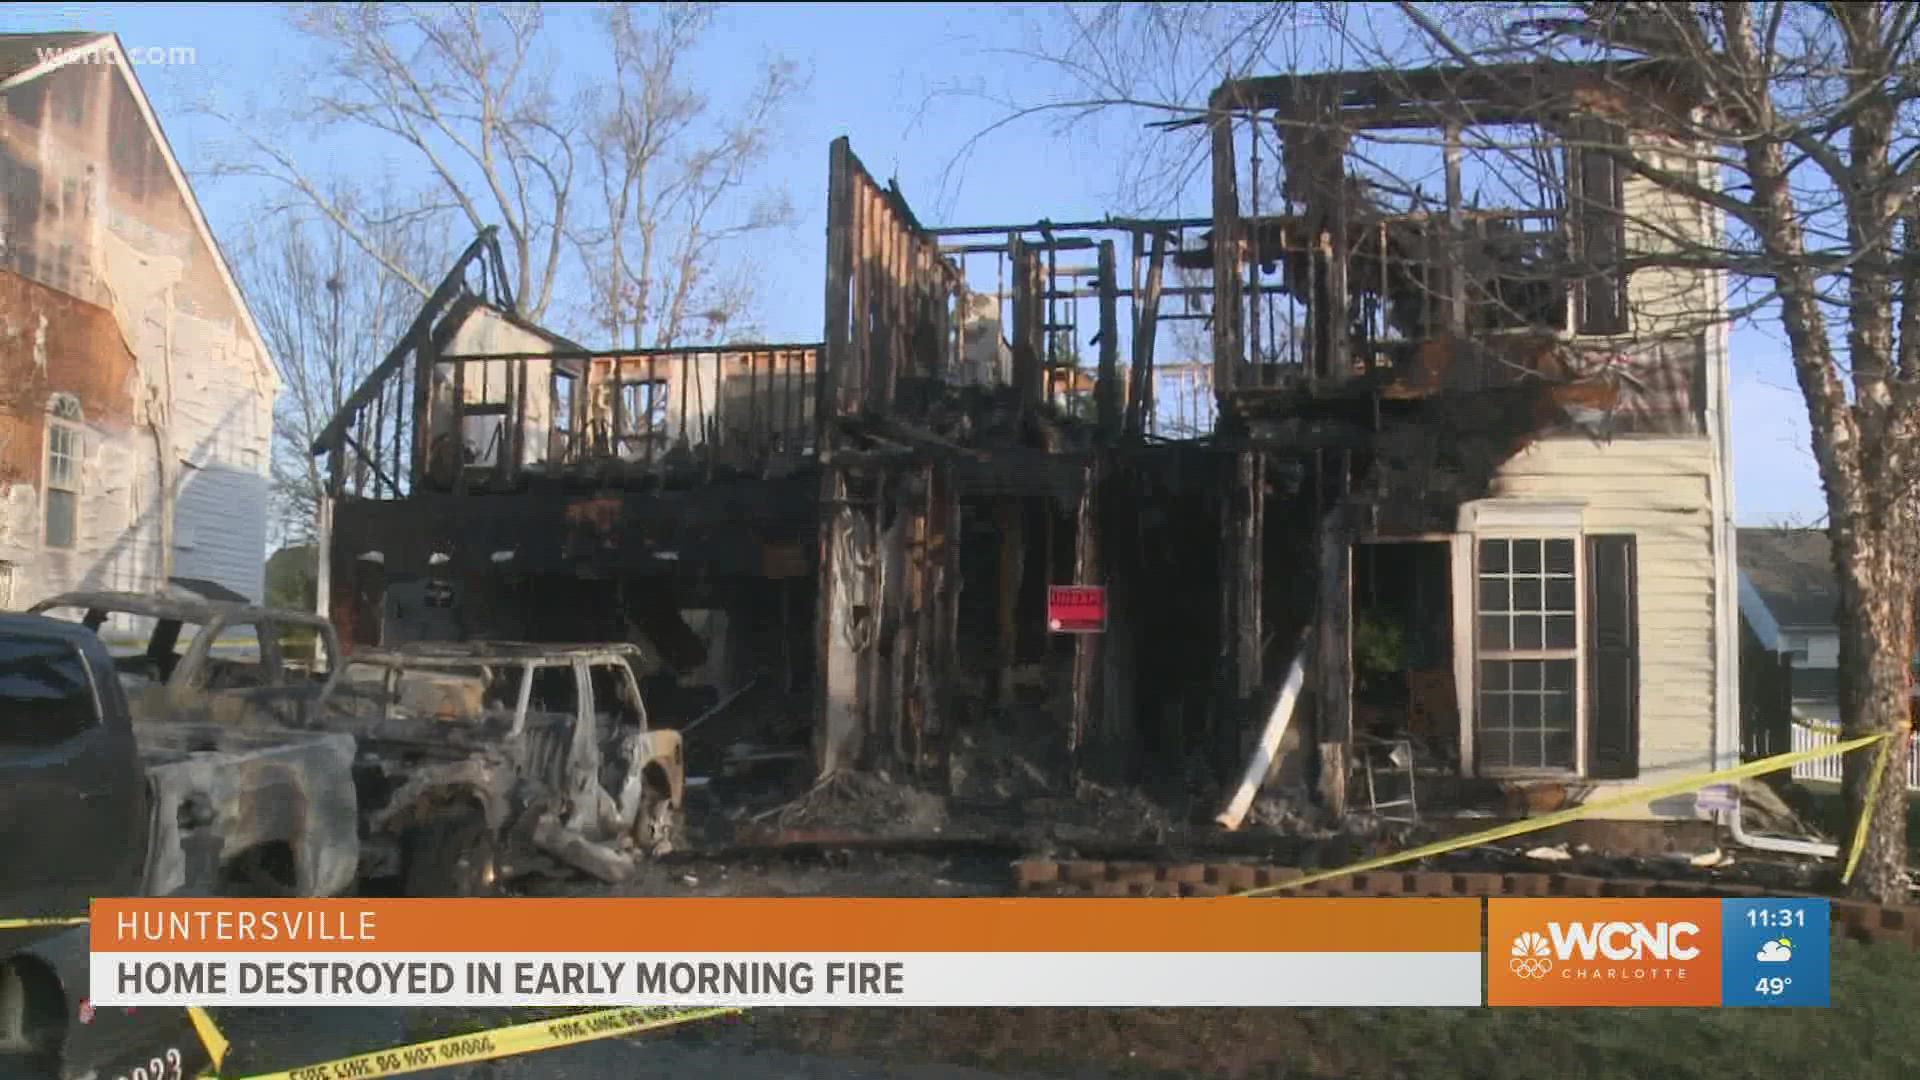 A Huntersville couple was able to escape without injuries when a fire ripped through their home early Wednesday morning, officials said.